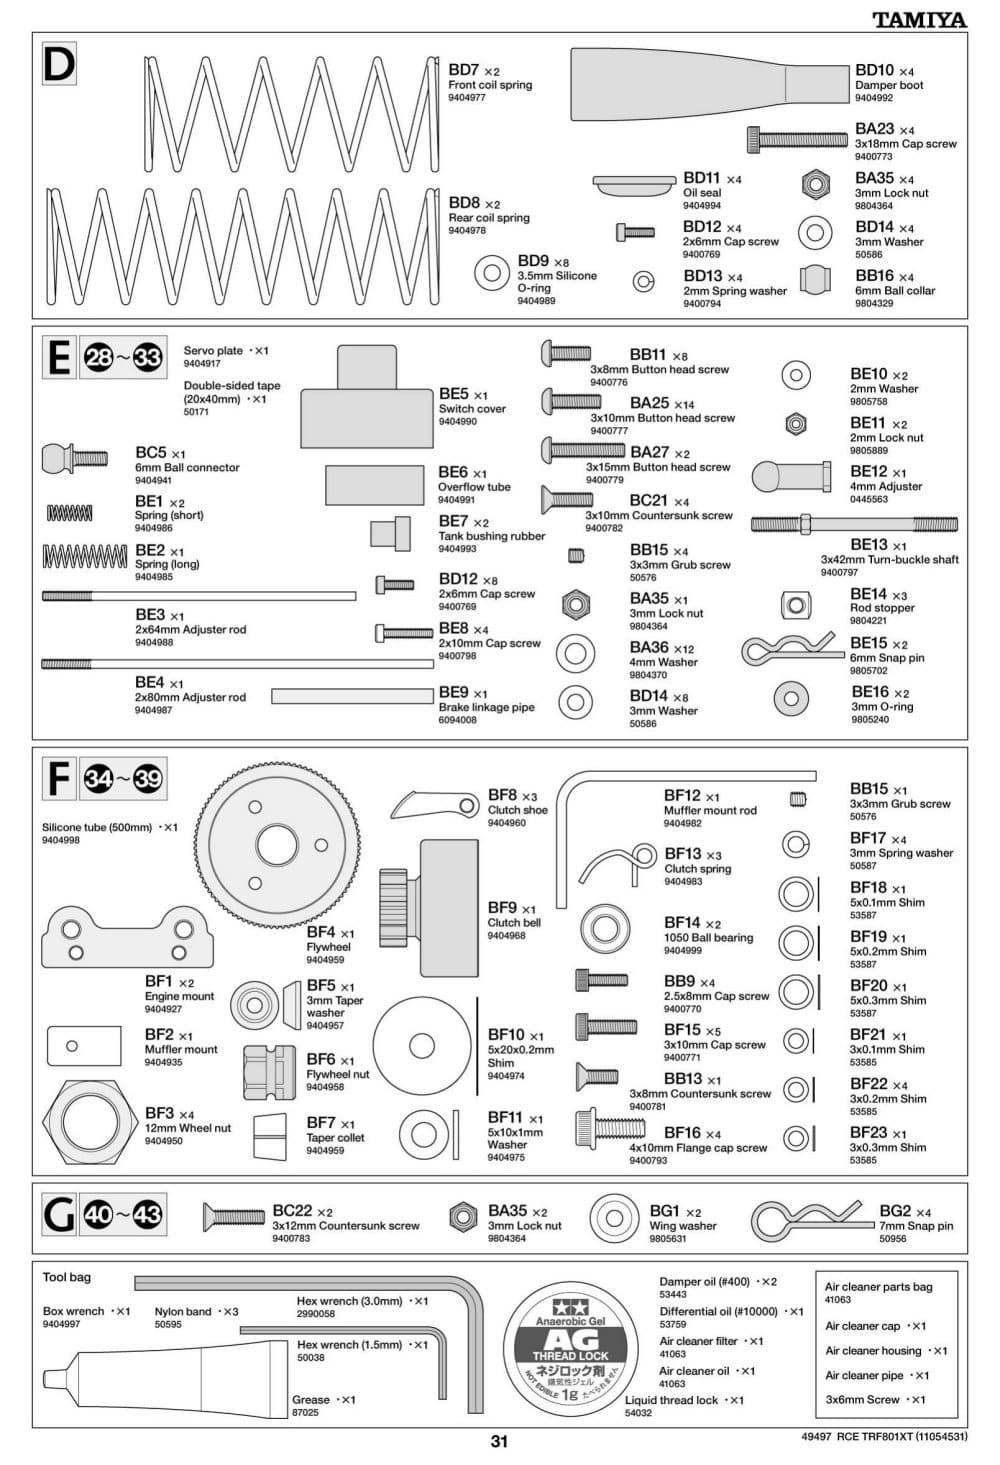 Tamiya - TRF801Xt Performance Package Version Chassis - Manual - Page 31